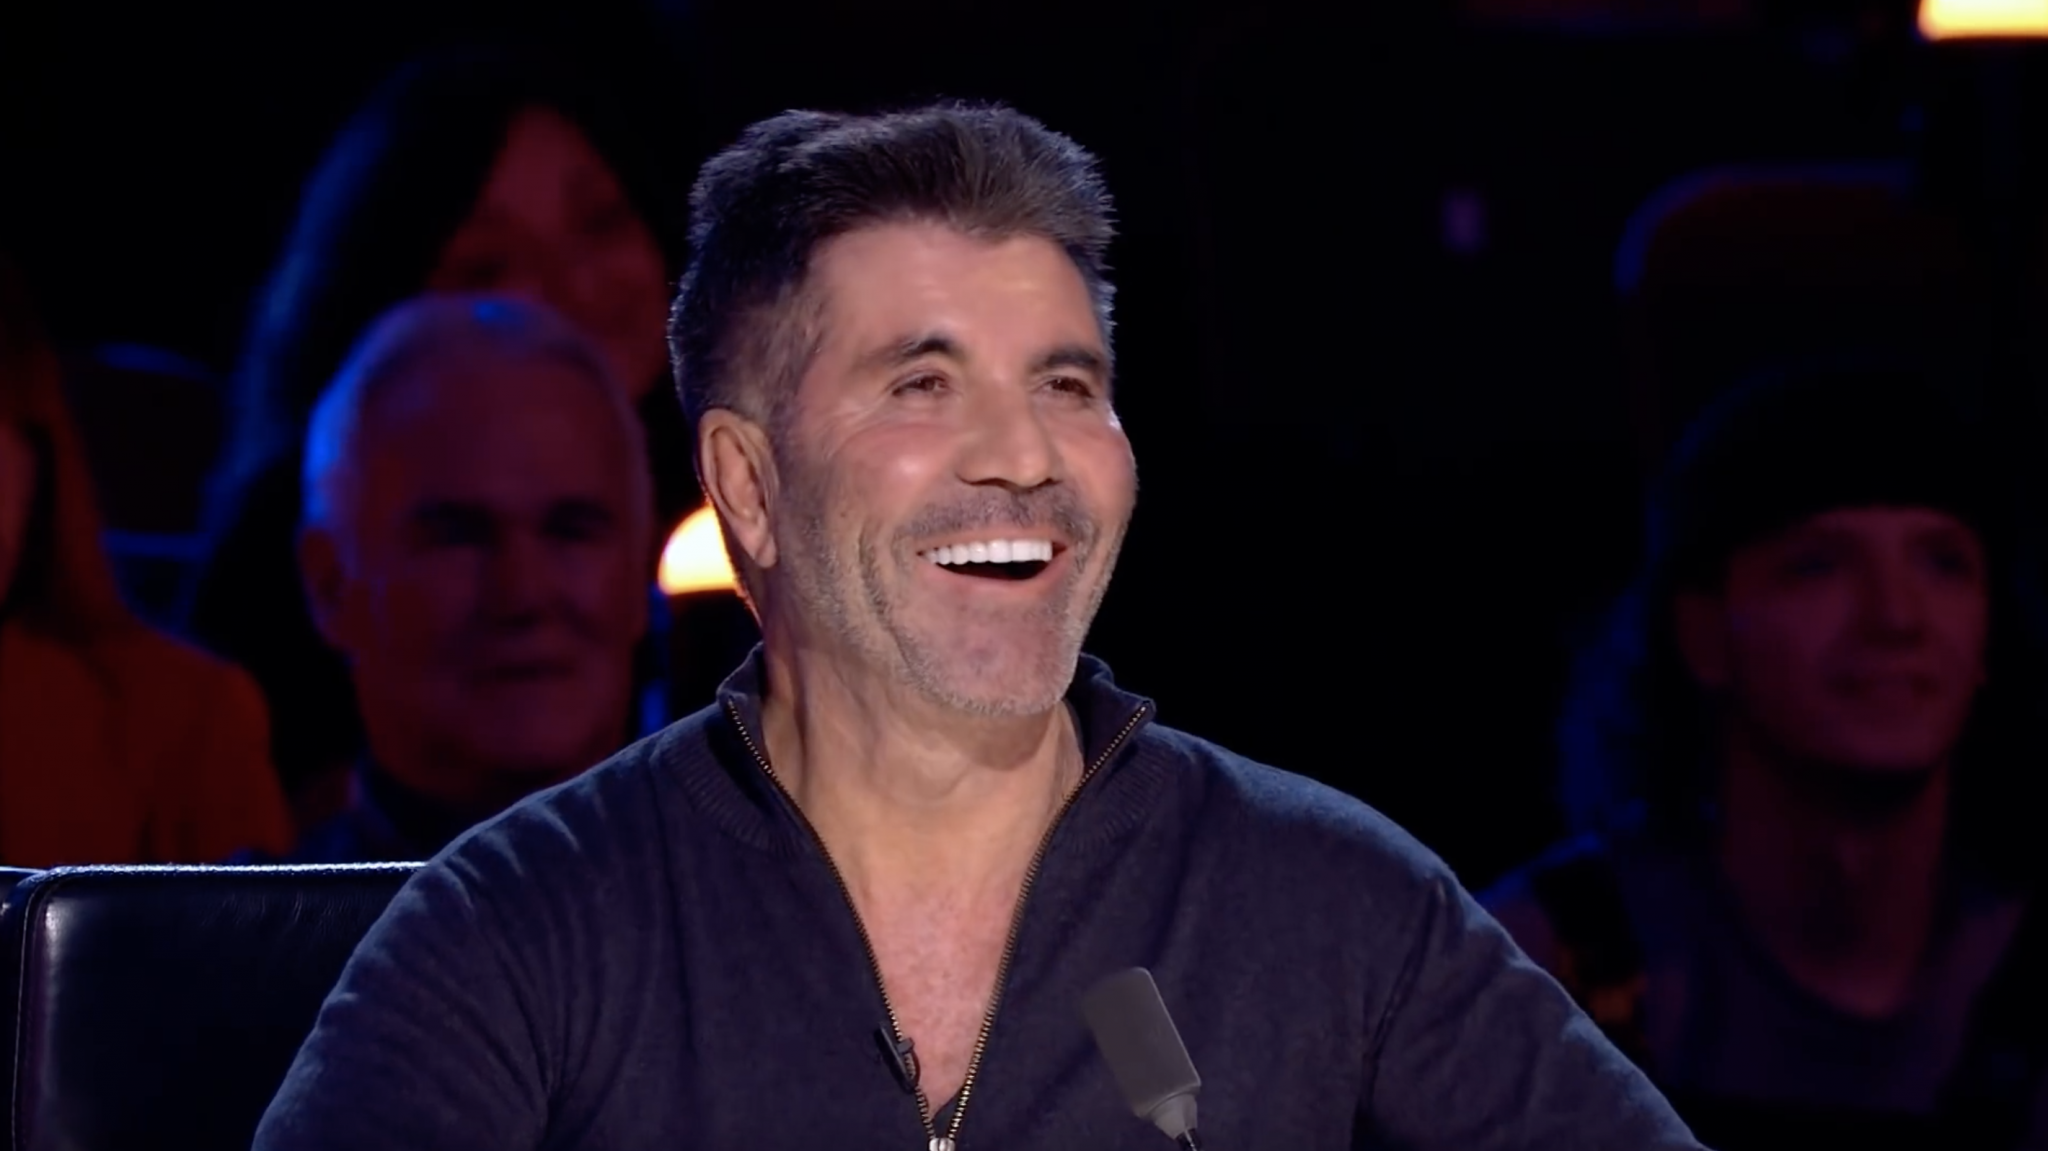 Simon Cowell laughing at Titan the Robot during his Britain's Got Talent audition at the London Palladium. #BGT